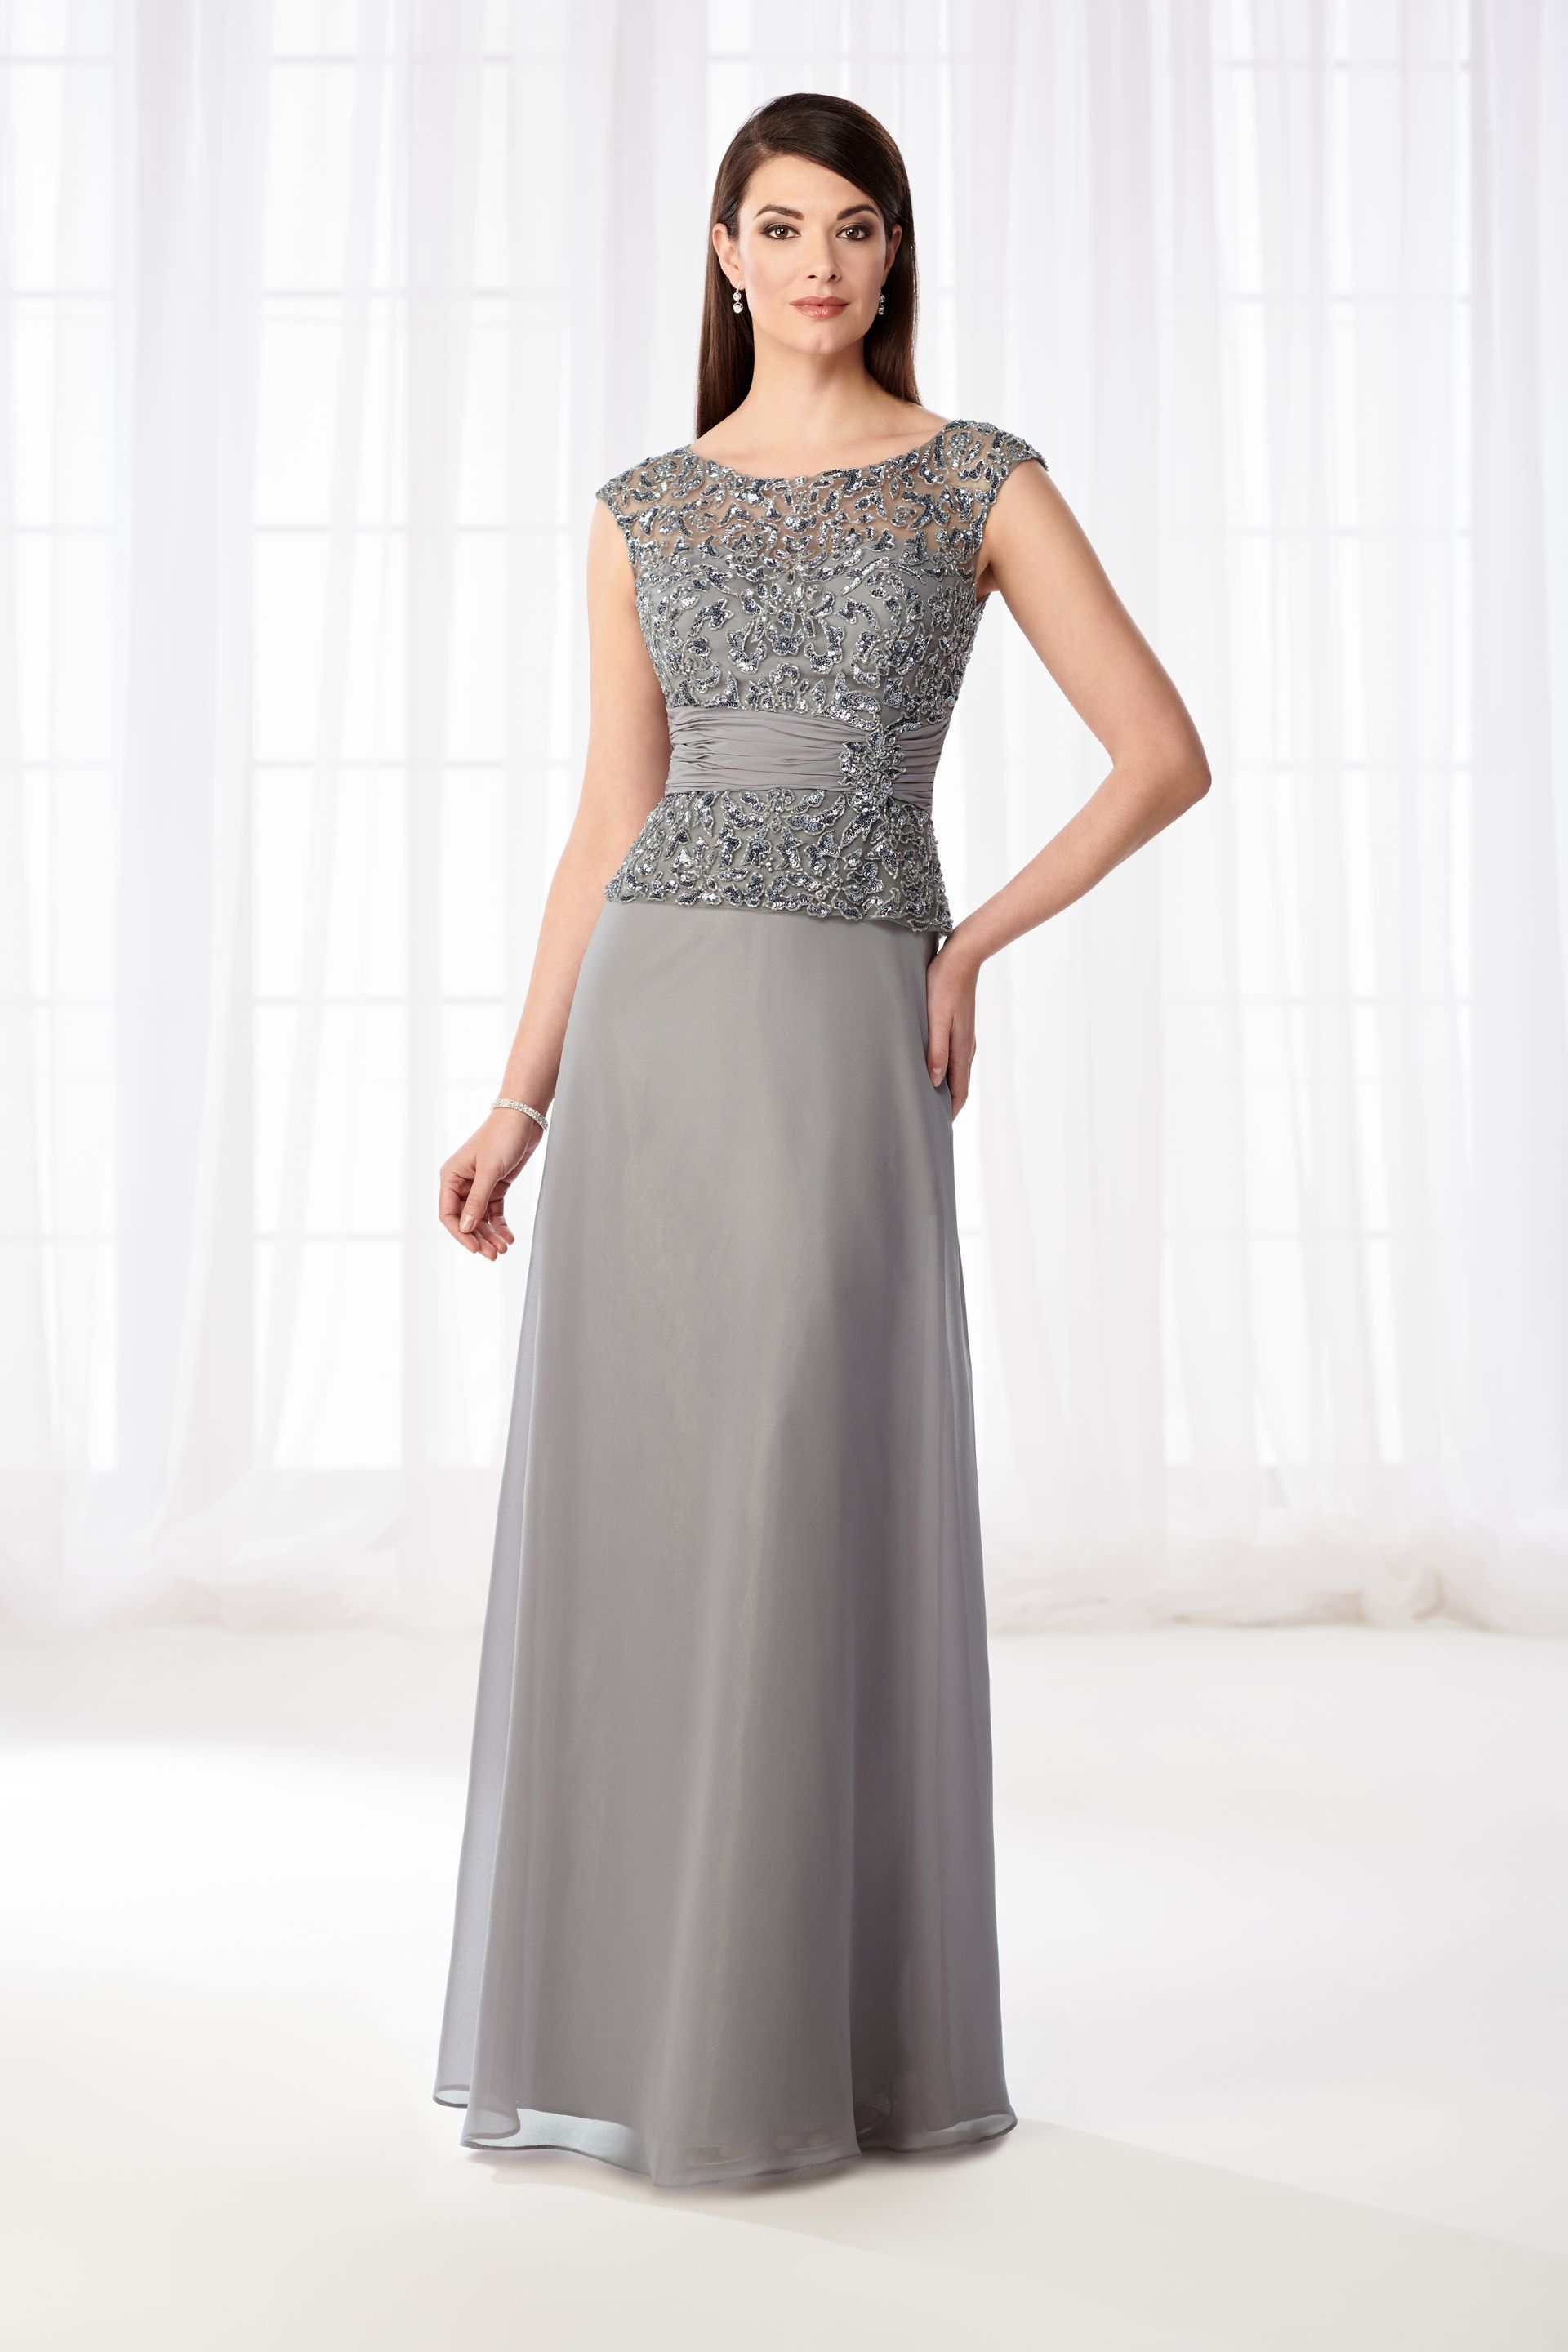 Mother of the bride a-line dress by designer Cameron Blake at Fifi's Bridal in Elmhurst, IL